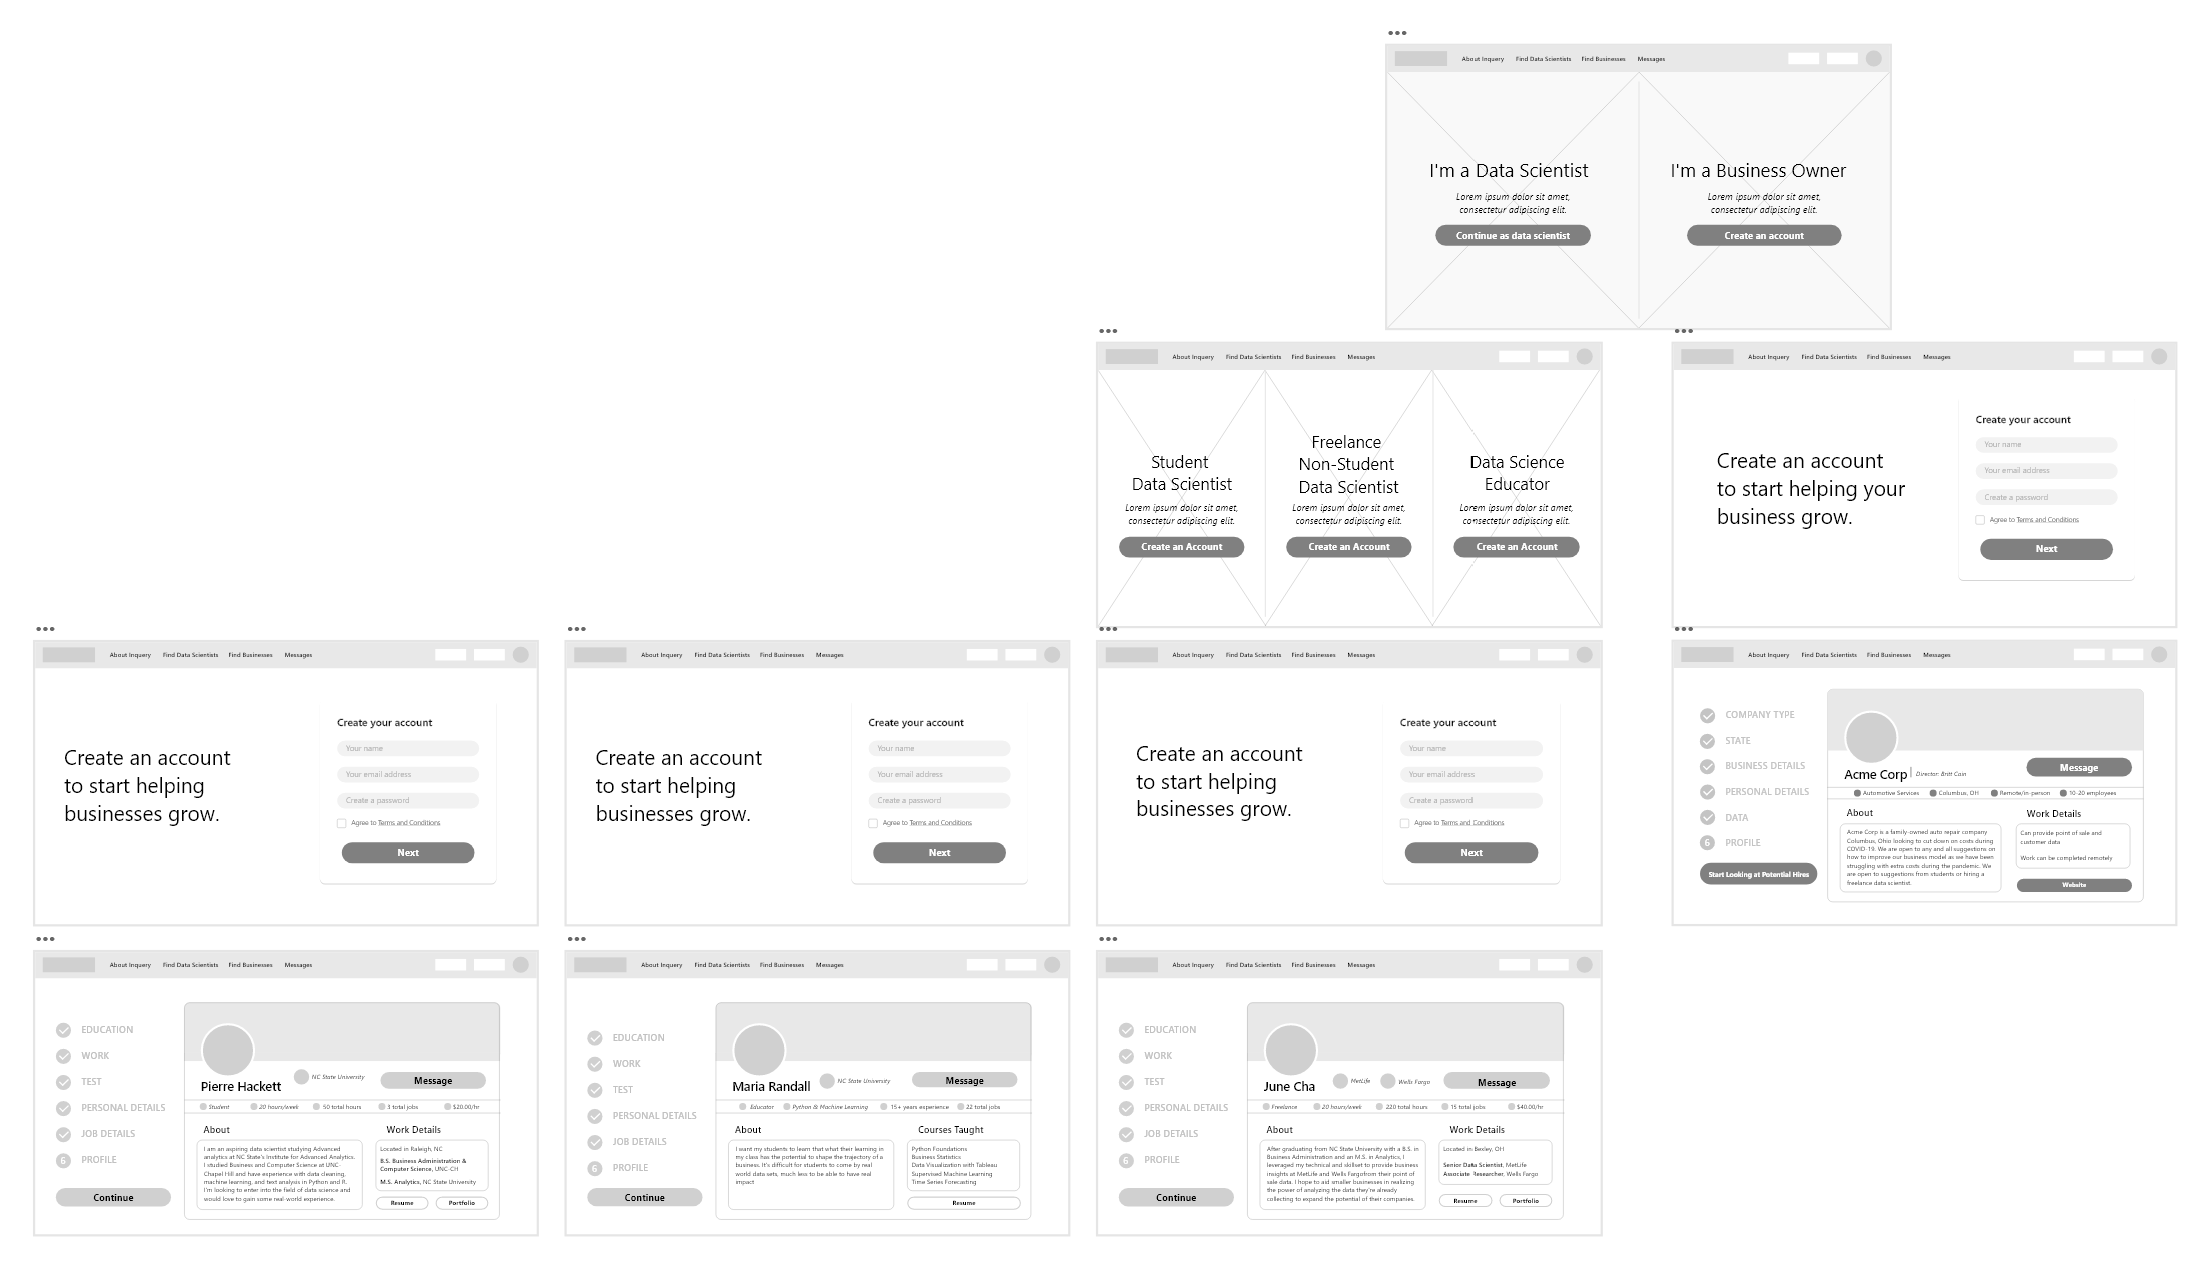 Wireframes for creating an account